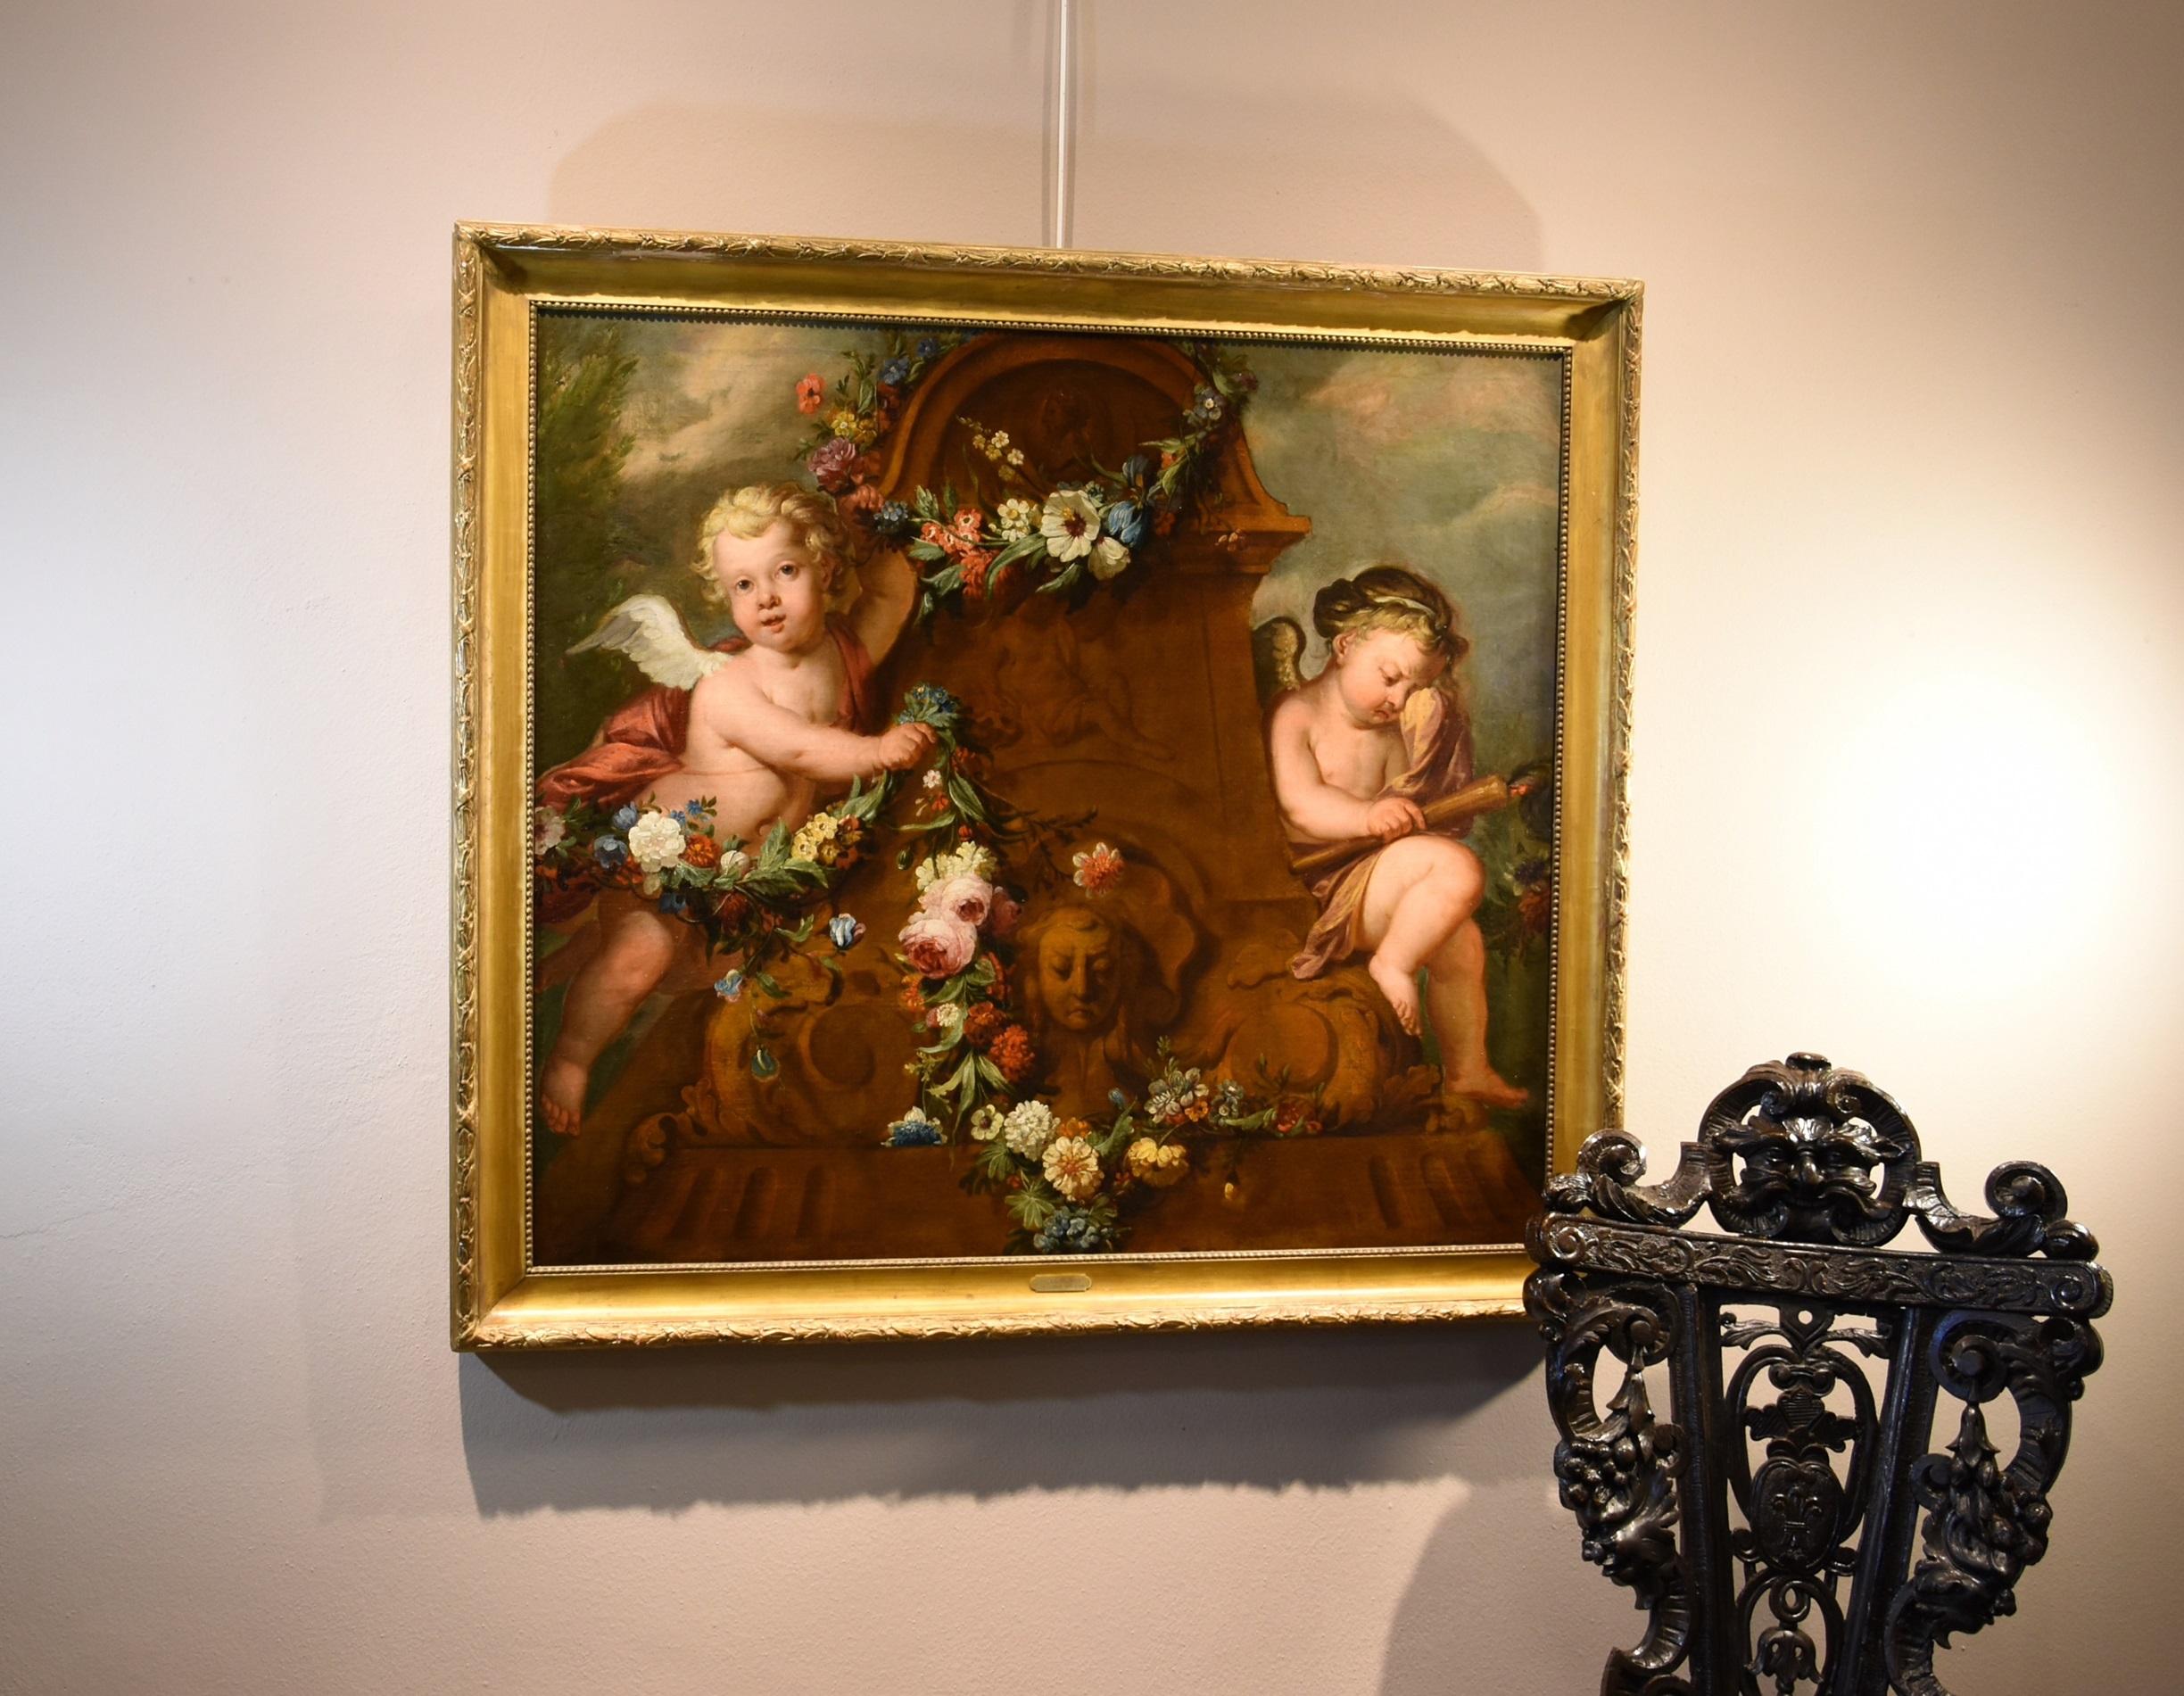 Jacob De Wit (Amsterdam, 1695 - 1754) attributable/ workshop
Pair of Cupids with Garland of Flowers

Oil on canvas
91 x 103 cm. - Framed 104 x 115 cm.

Provenance: Christie's (London, Old master Painting 12.12.1996) lot 82

This magnificent